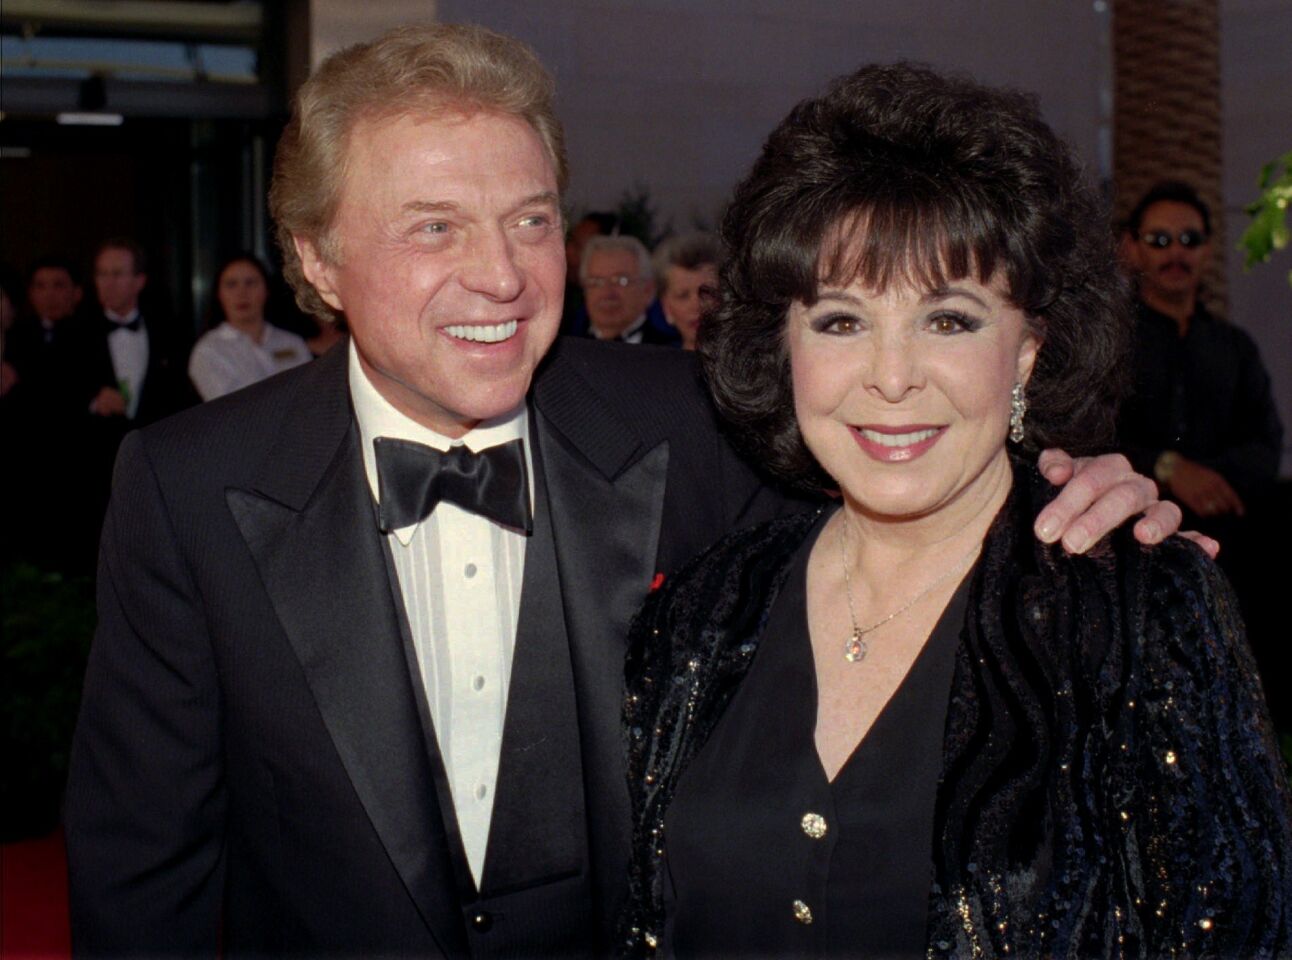 Often with husband Steve Lawrence, Eydie Gorme sang at clubs and on television, including on Steve Allen's 'Tonight' show. She was 84. Full obituary Notable deaths of 2012